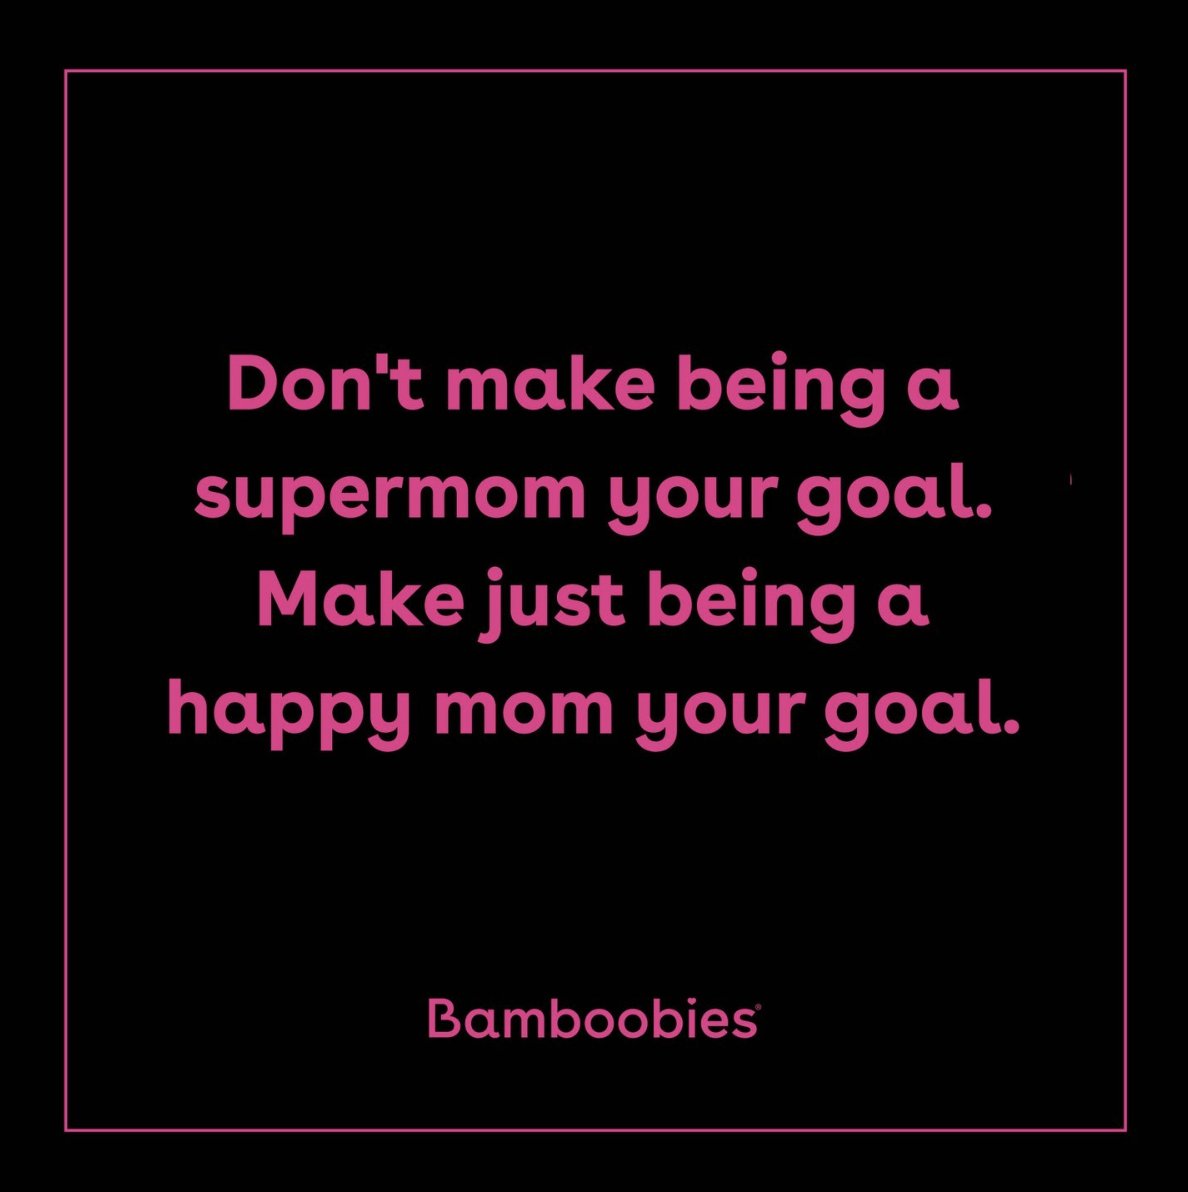 Bamboobies on X: As moms, we often strive for perfection and set too many  expectations on ourselves. It's ok to lower the bar and settle for less  than super mom. We can't